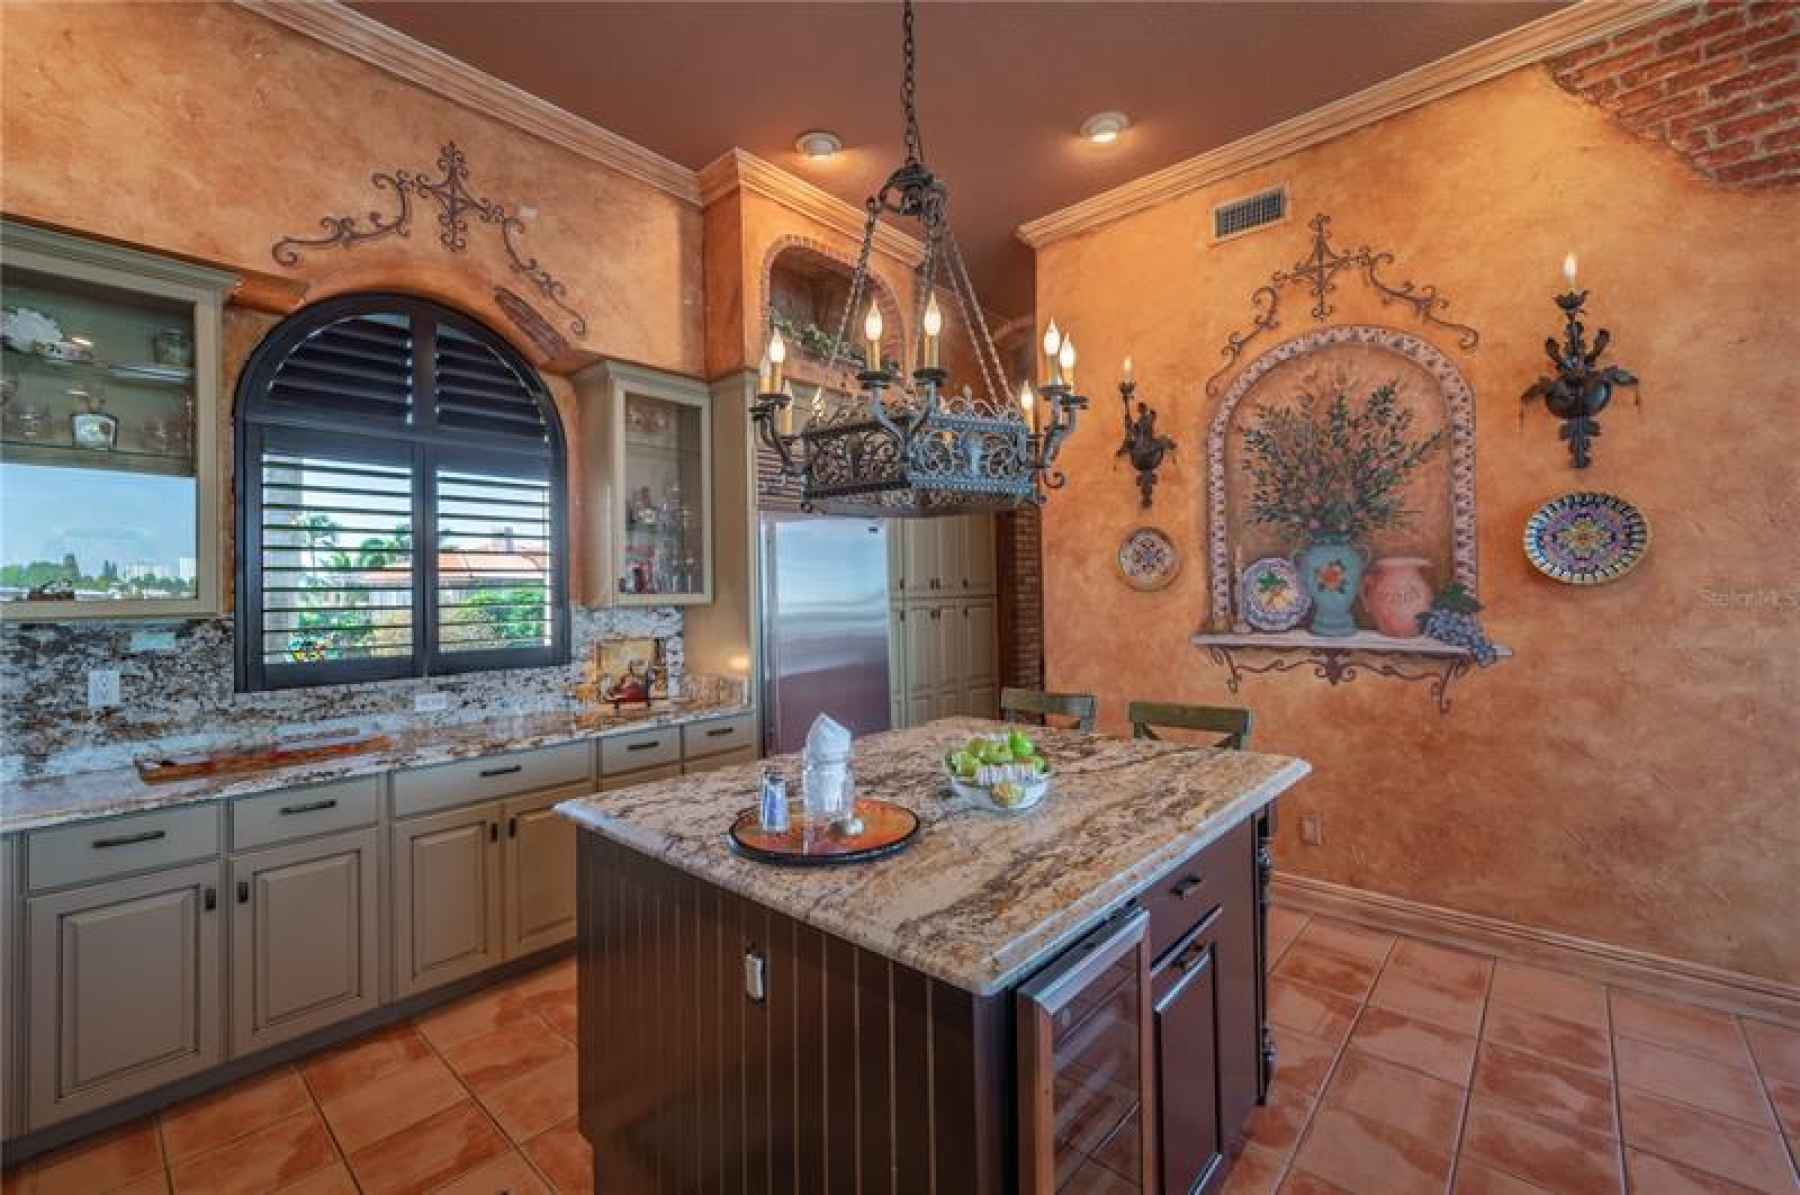 Incredible Amount of Countertop Space!